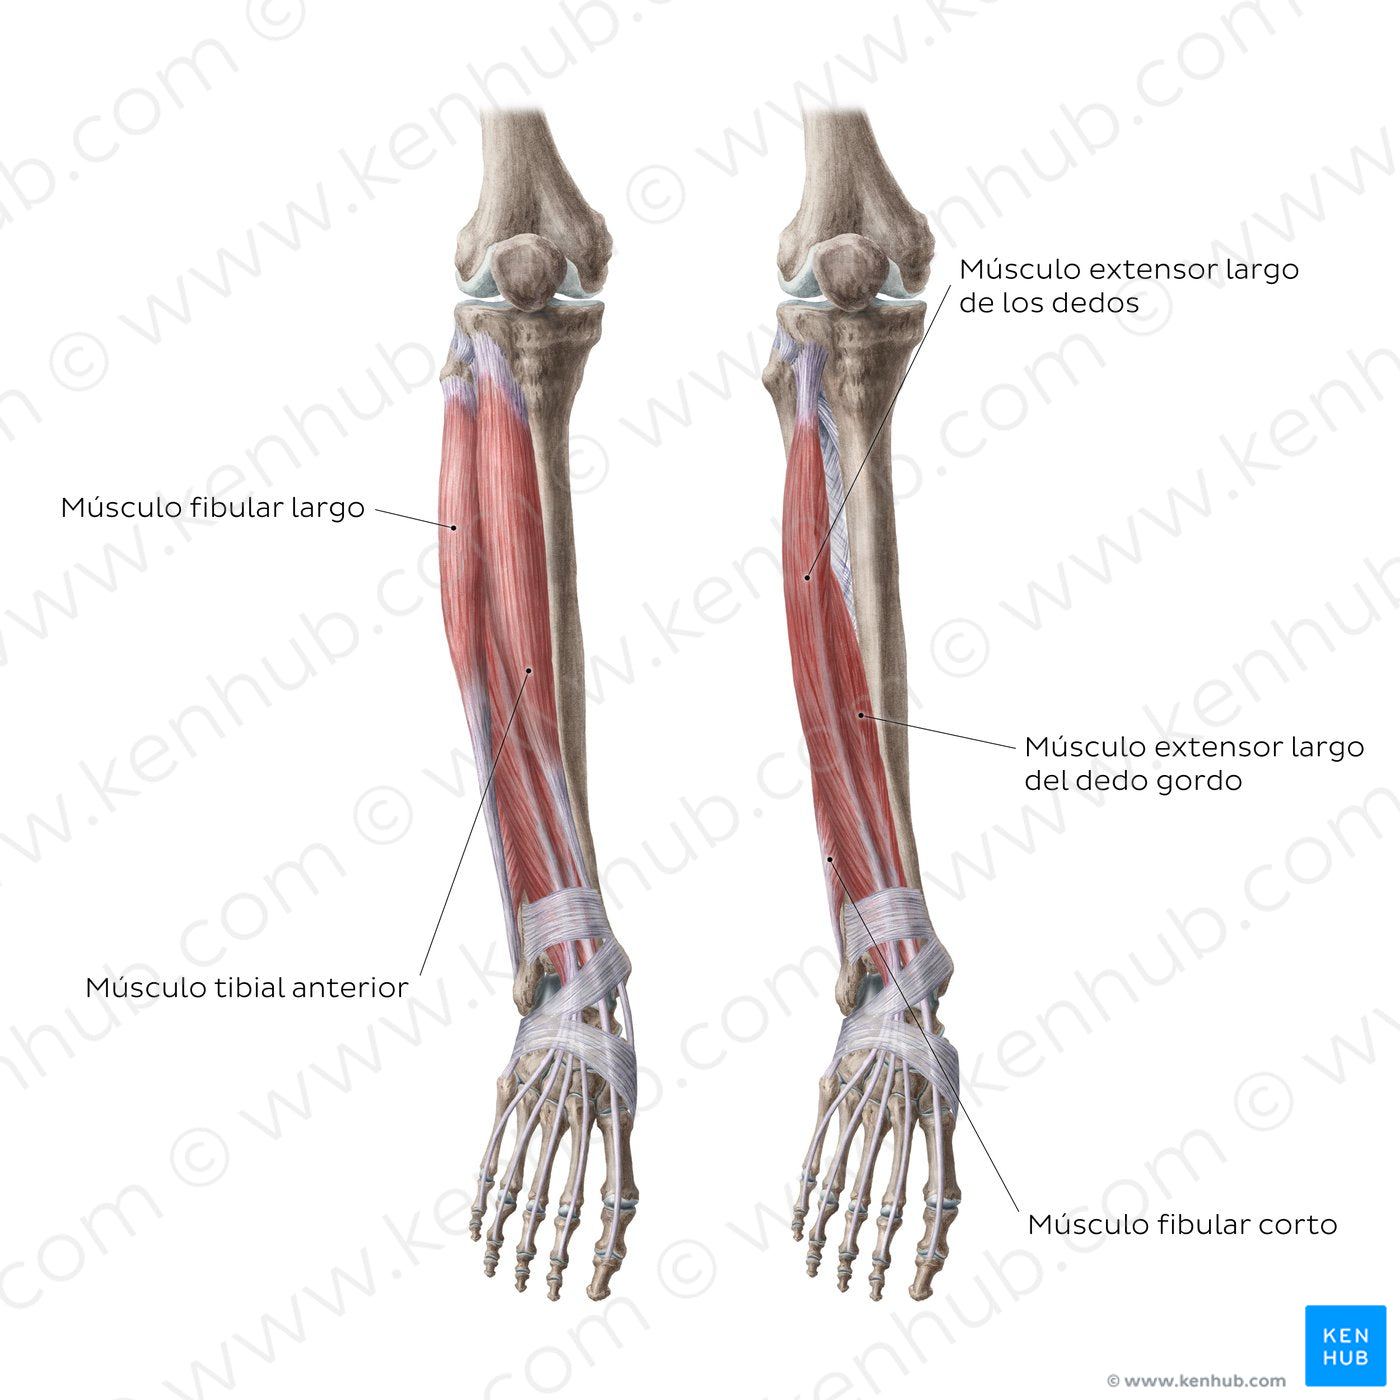 Muscles of the leg (Anterior view) (Spanish)